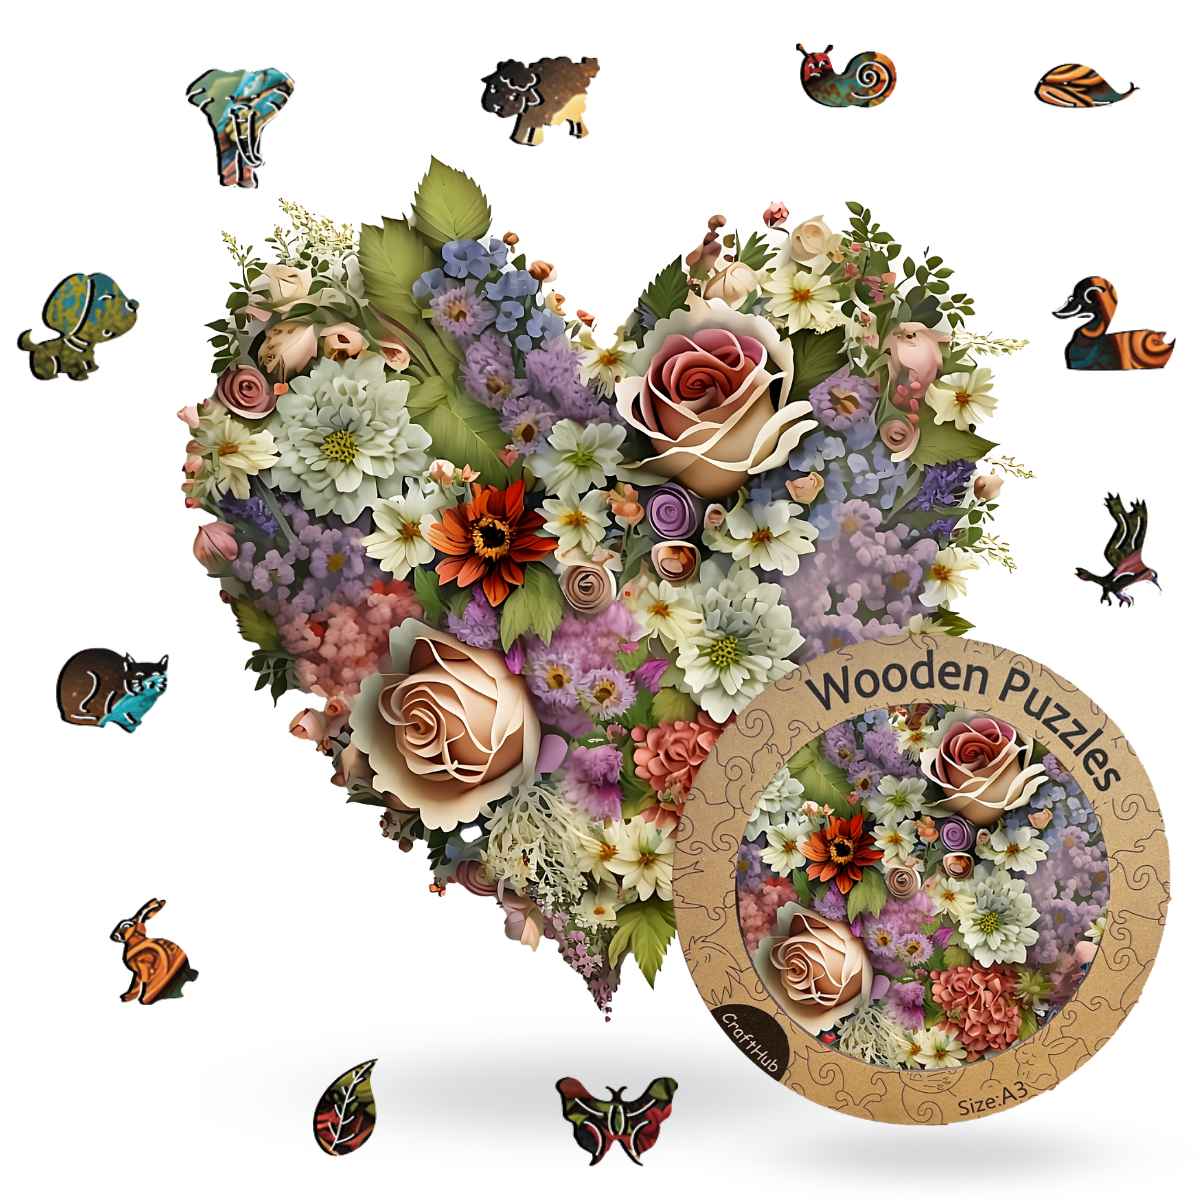 Animal Jigsaw Puzzle > Wooden Jigsaw Puzzle > Jigsaw Puzzle A3+Wooden Box Blooming Heart - Jigsaw Puzzle